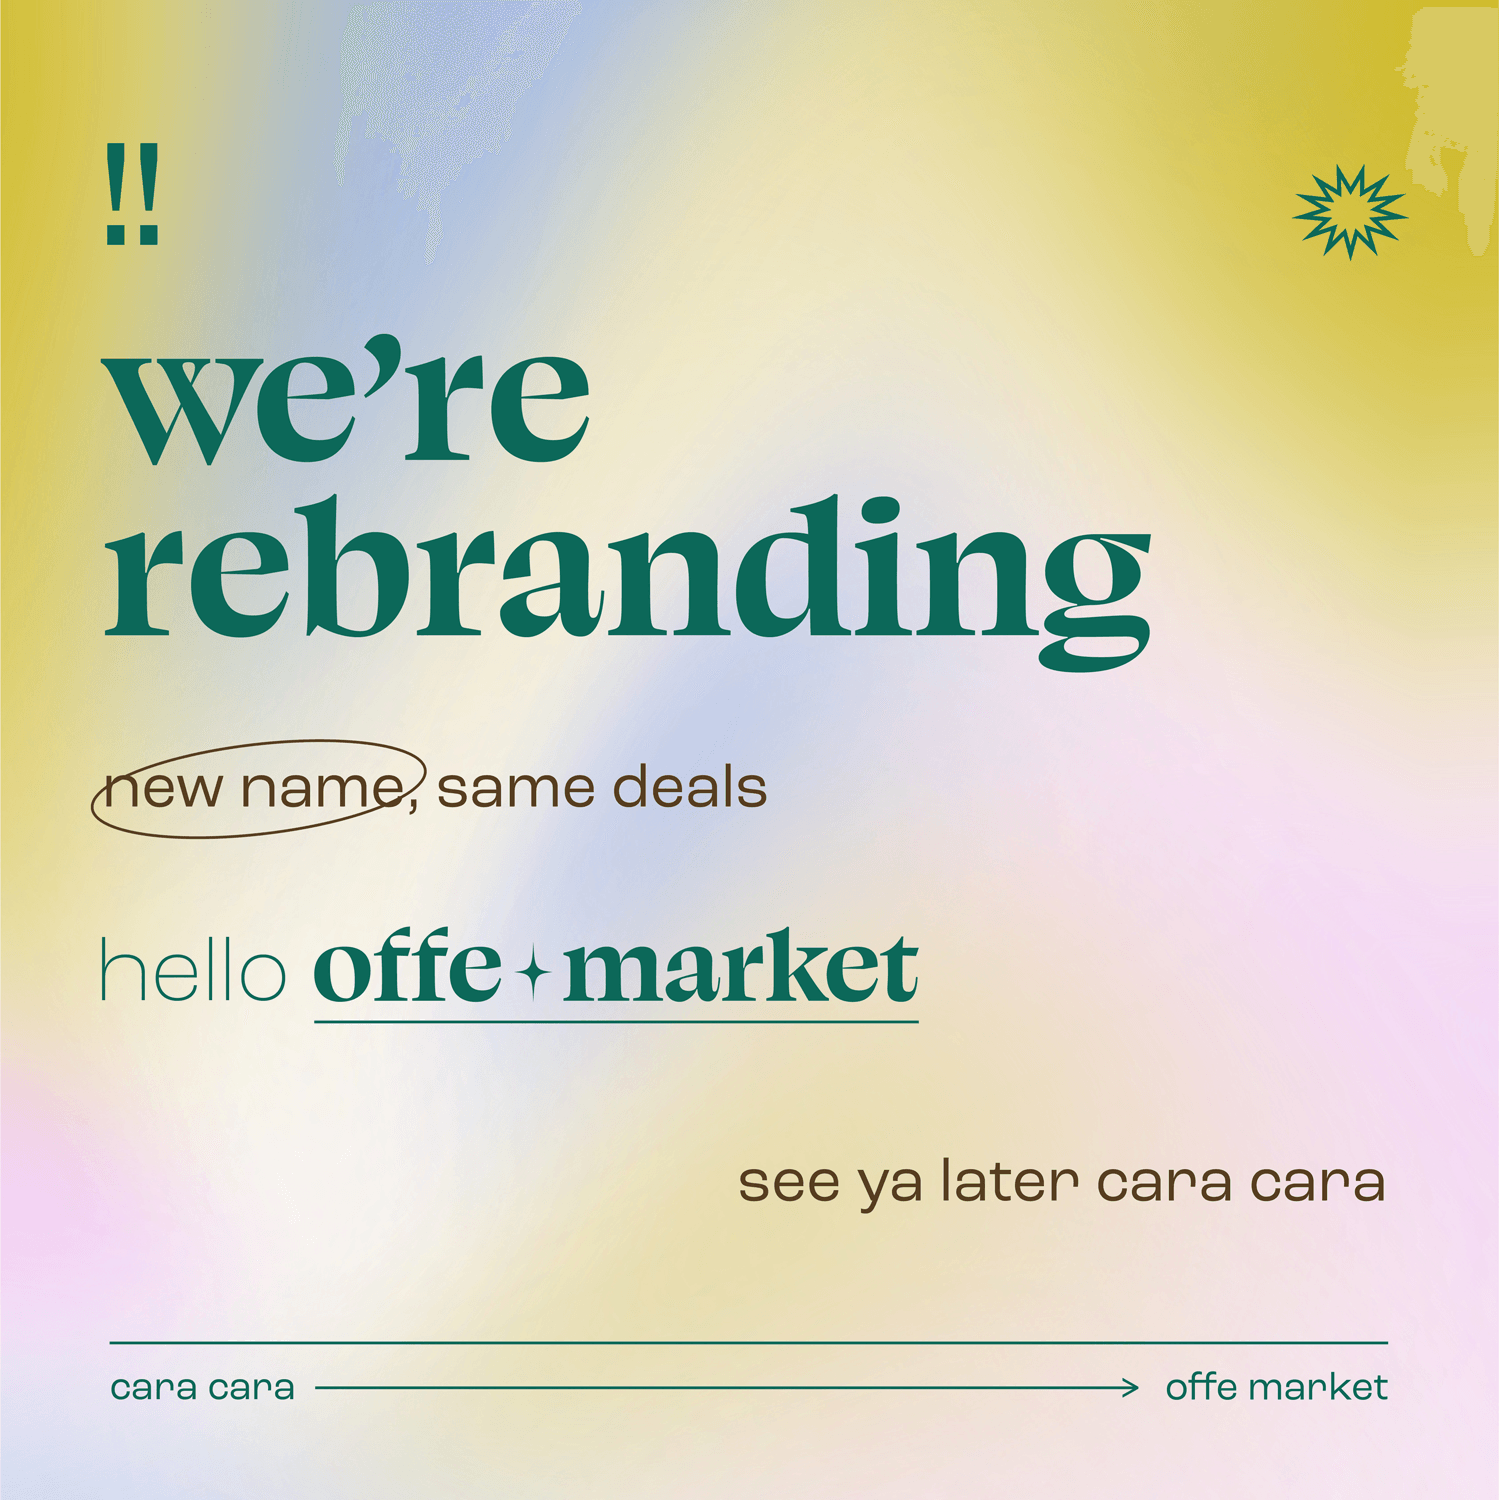 New name, same great deals - offe market